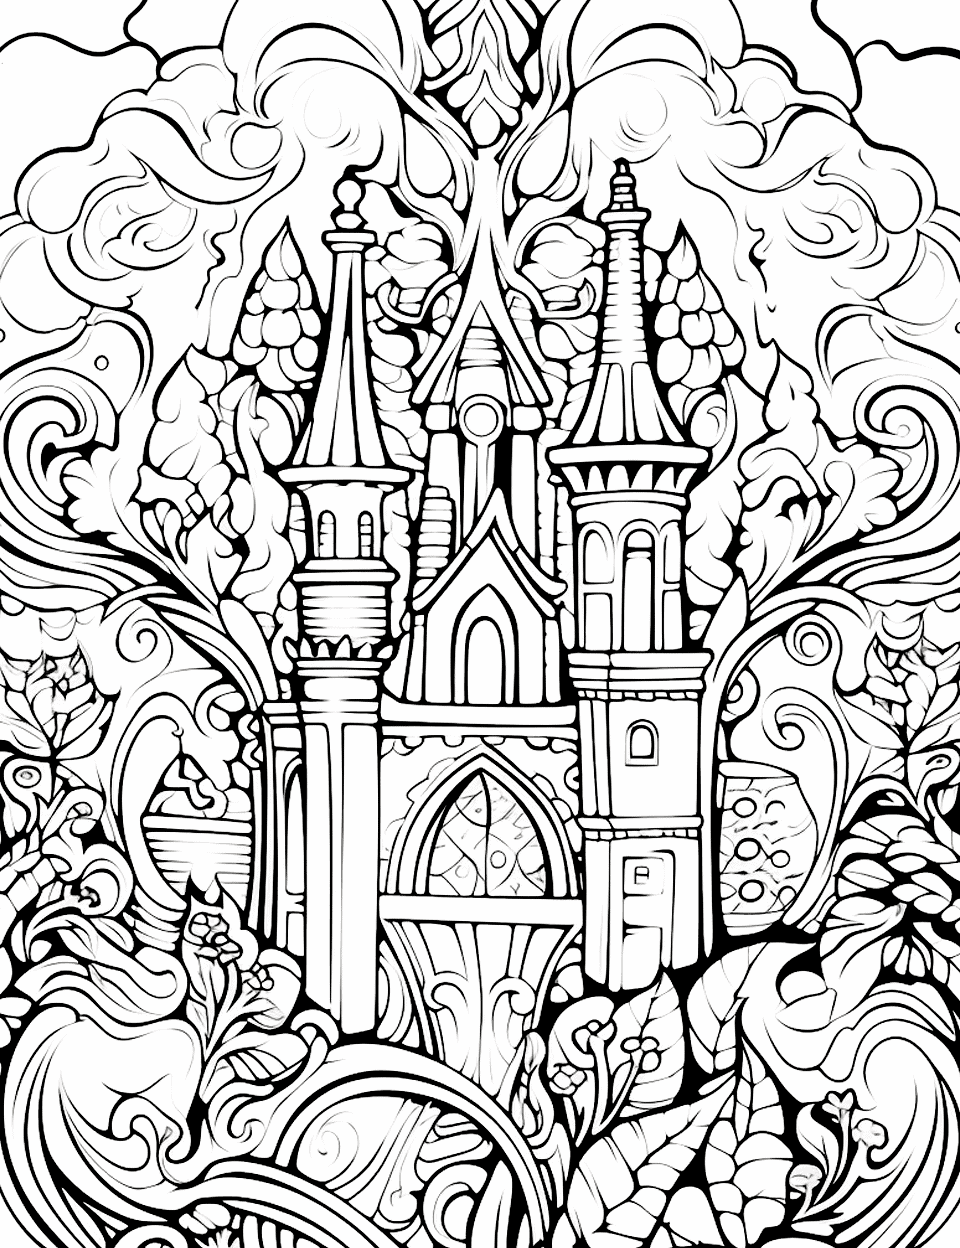 Fairy Tale Christmas Adult Coloring Page - A detailed, intricate Christmas scene from a fairy tale.